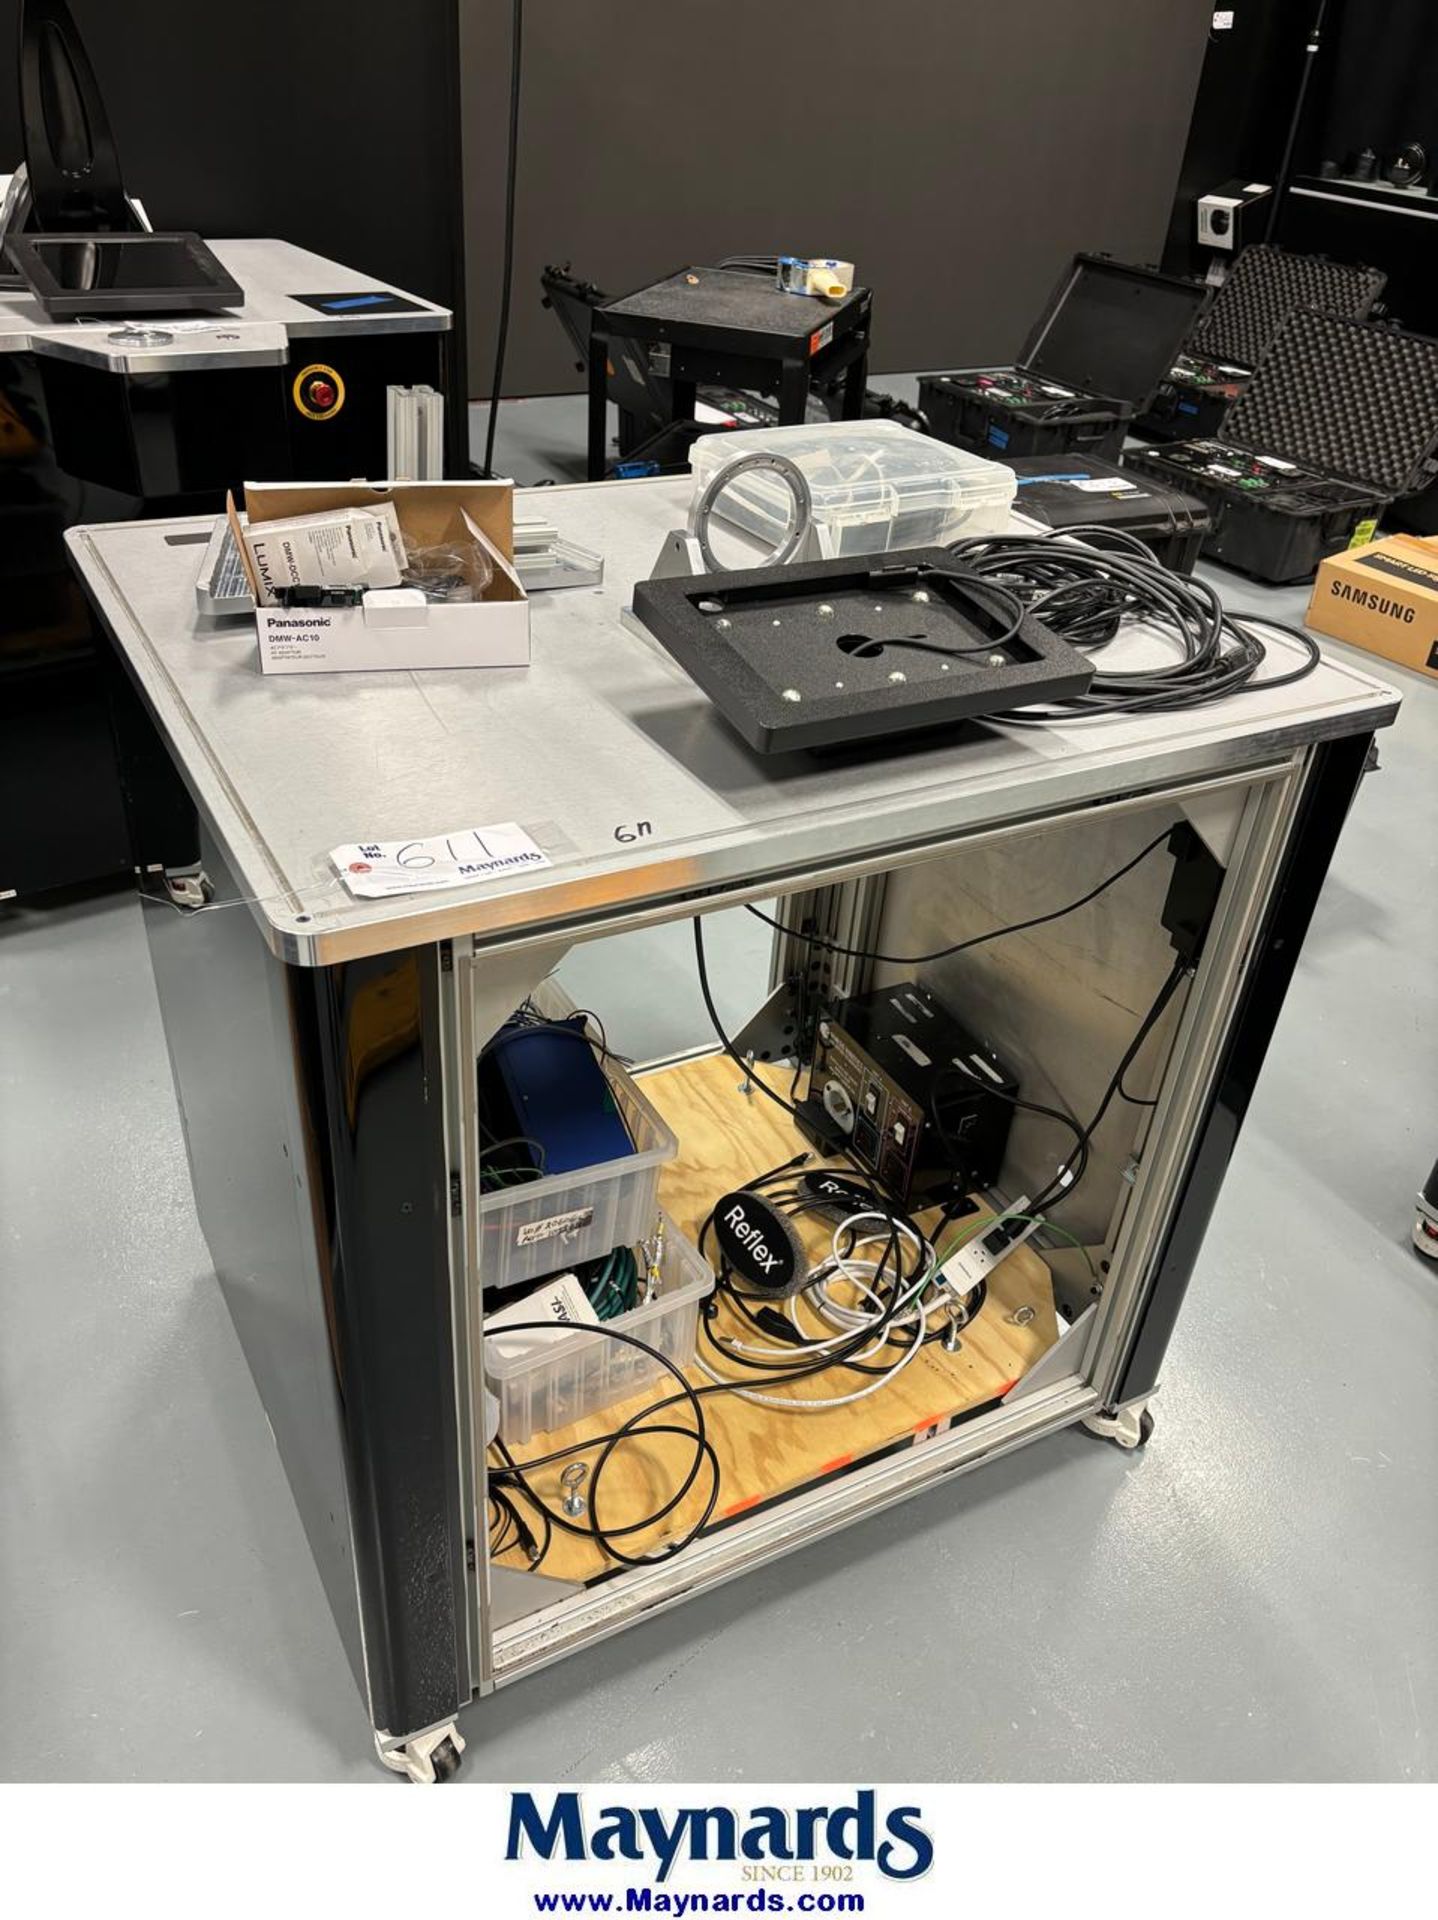 tradeshow demonstration station with power supply